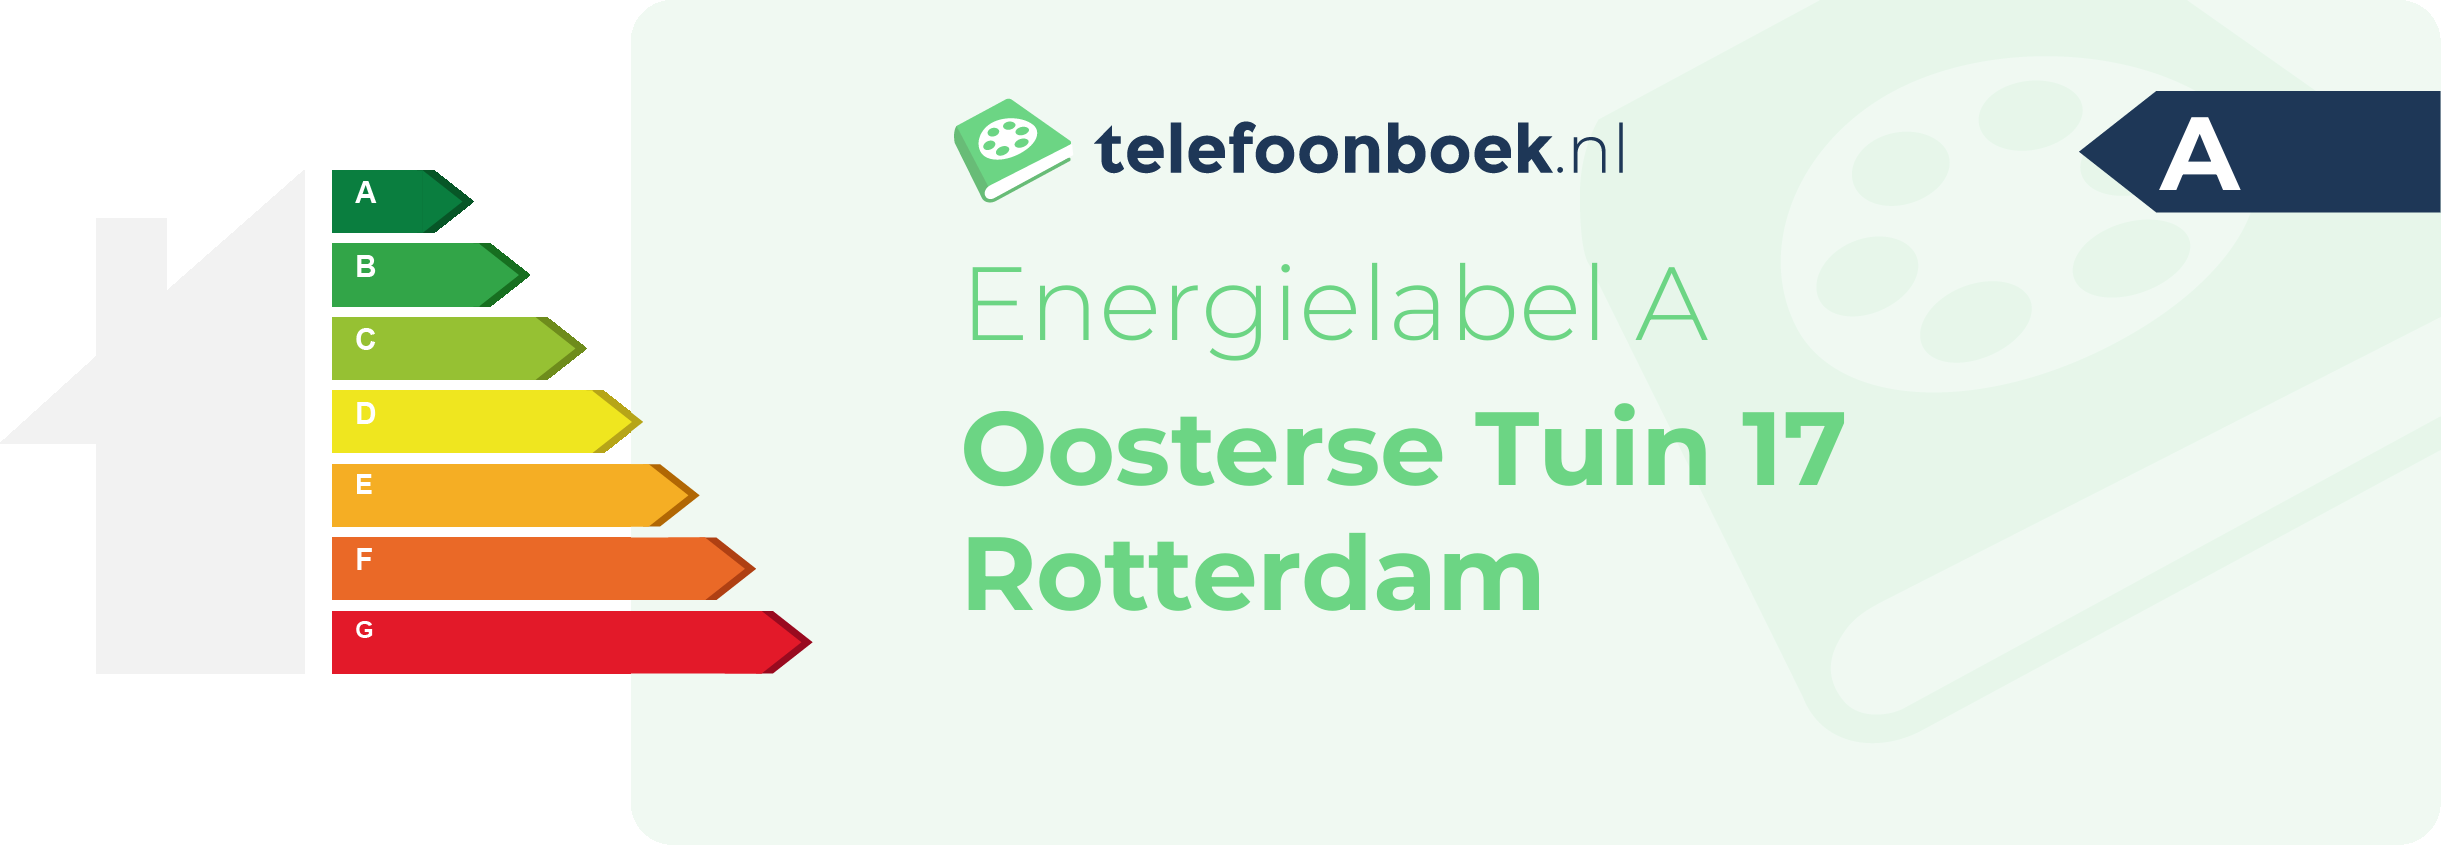 Energielabel Oosterse Tuin 17 Rotterdam